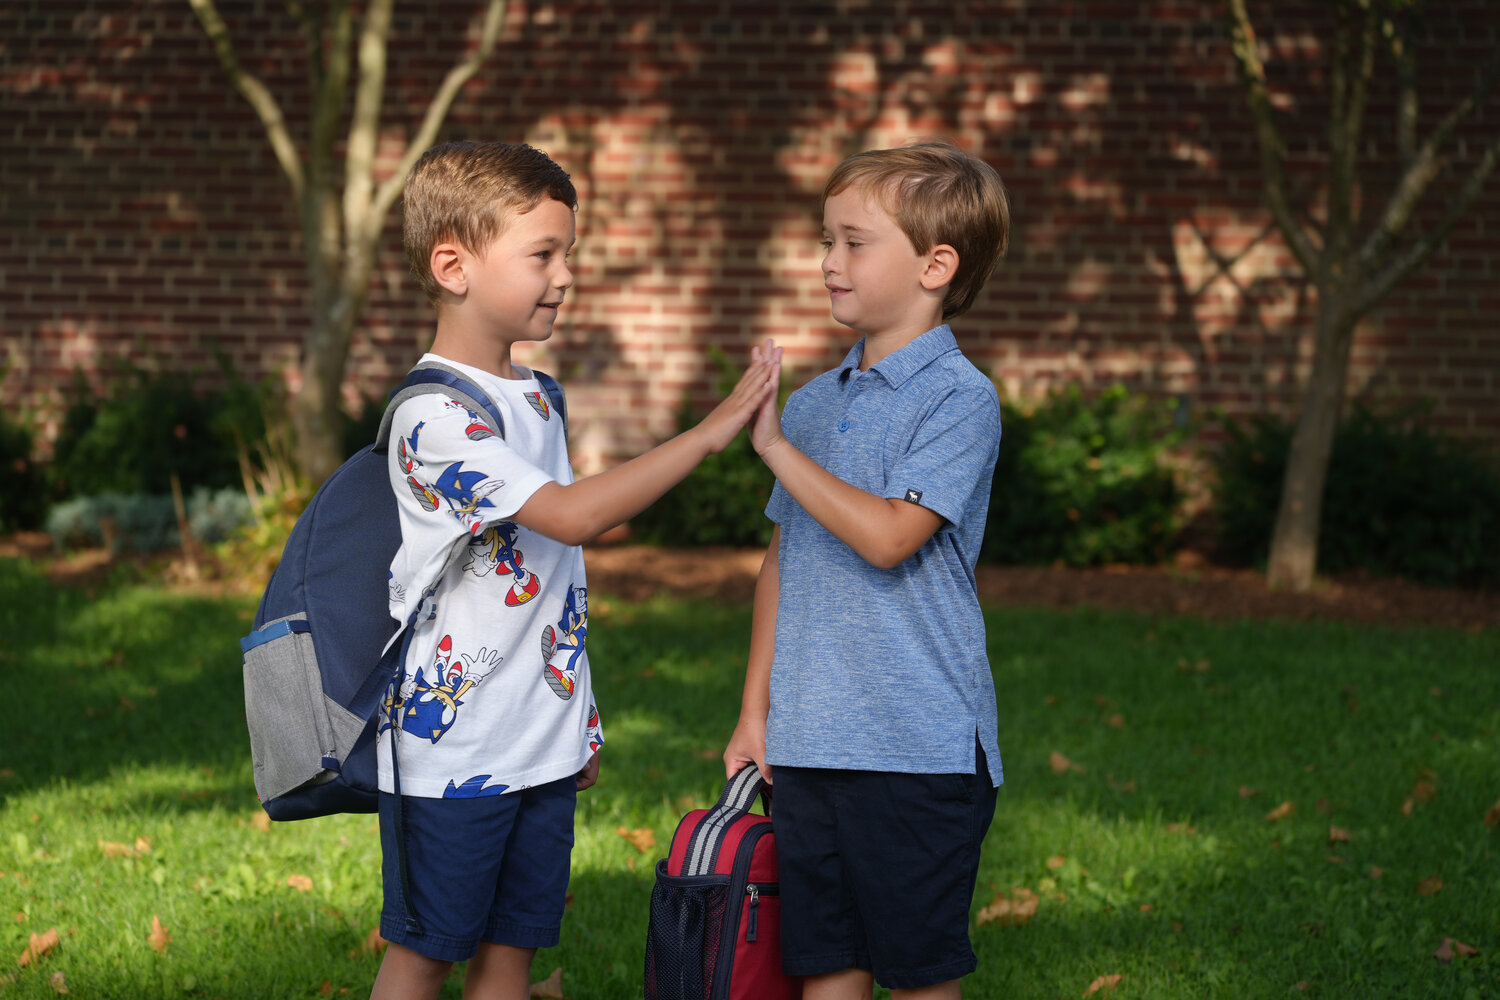 Ryan Burke and James Raffa celebrate their first day of Kindergarten at Covert Elementary with a high-five.